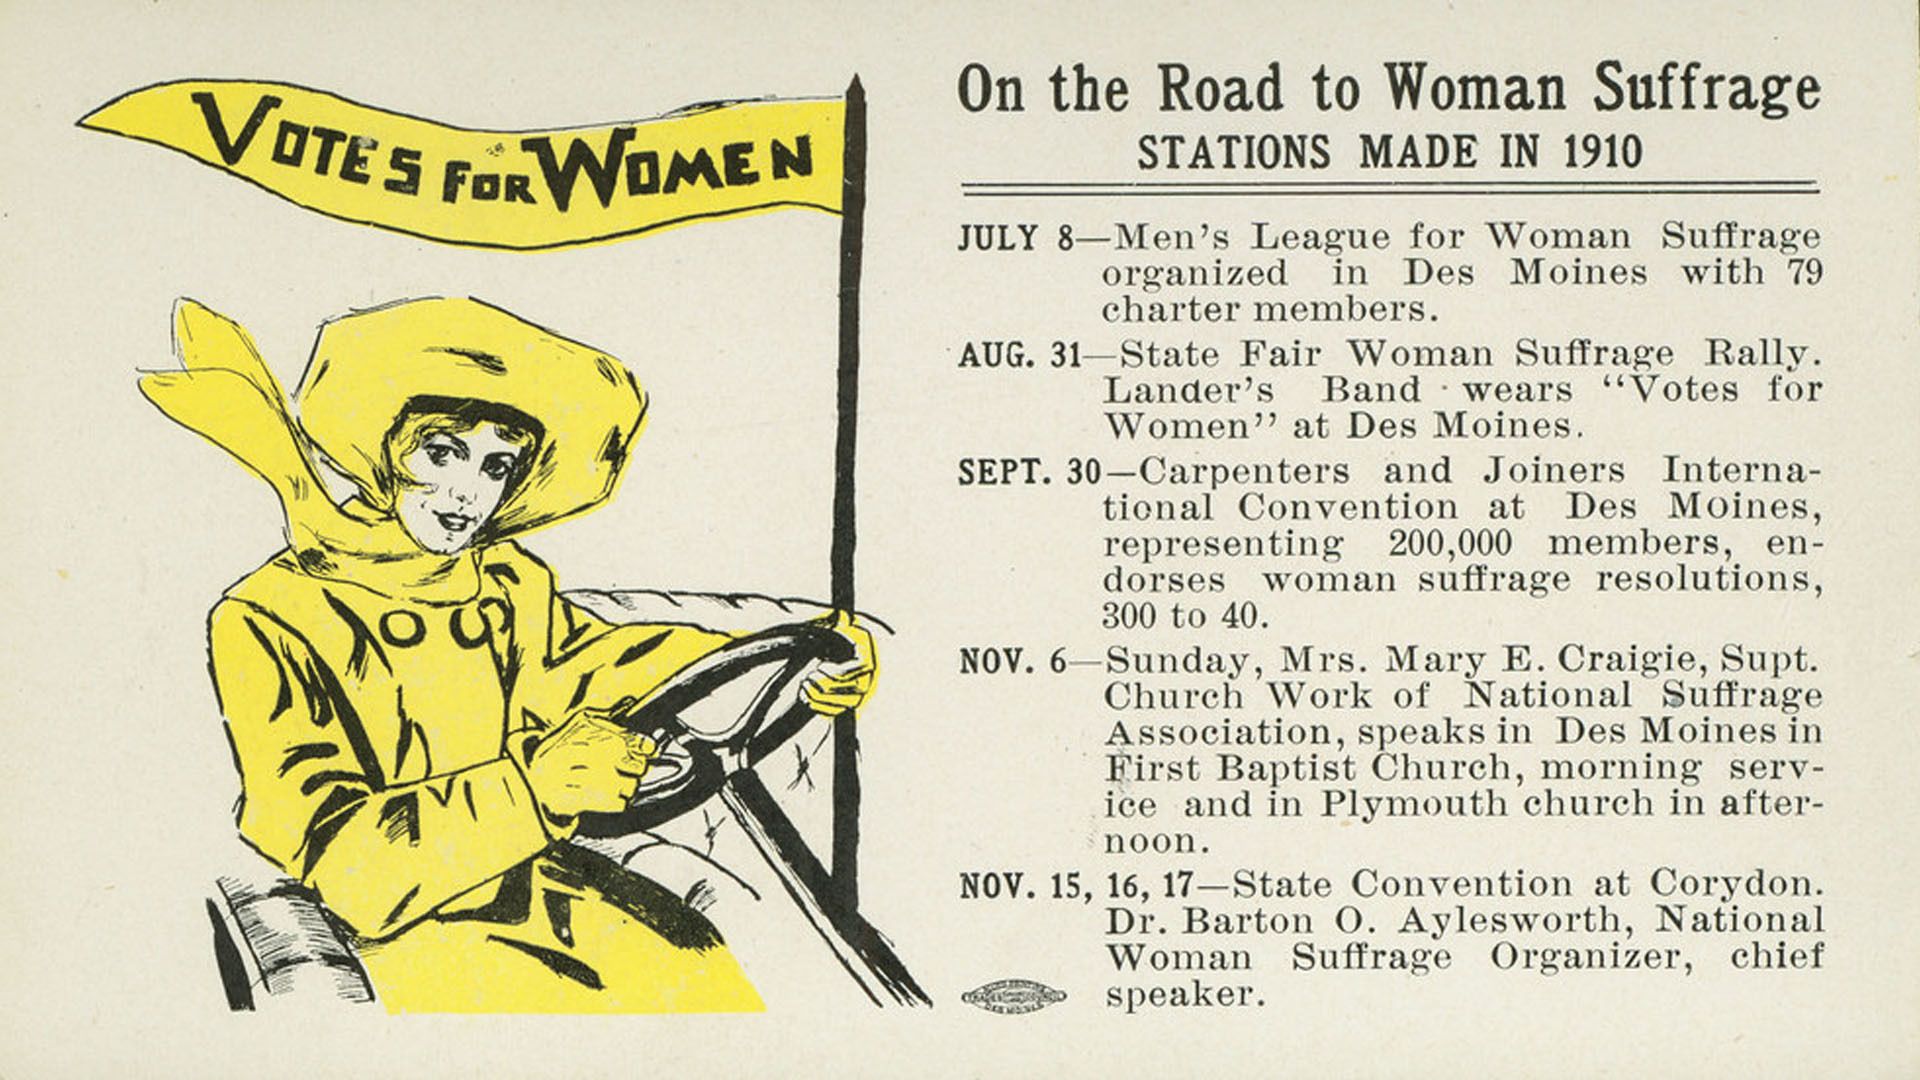 Ink blotter card publicizing some highlights of the Iowa women's suffrage campaign during 1910.